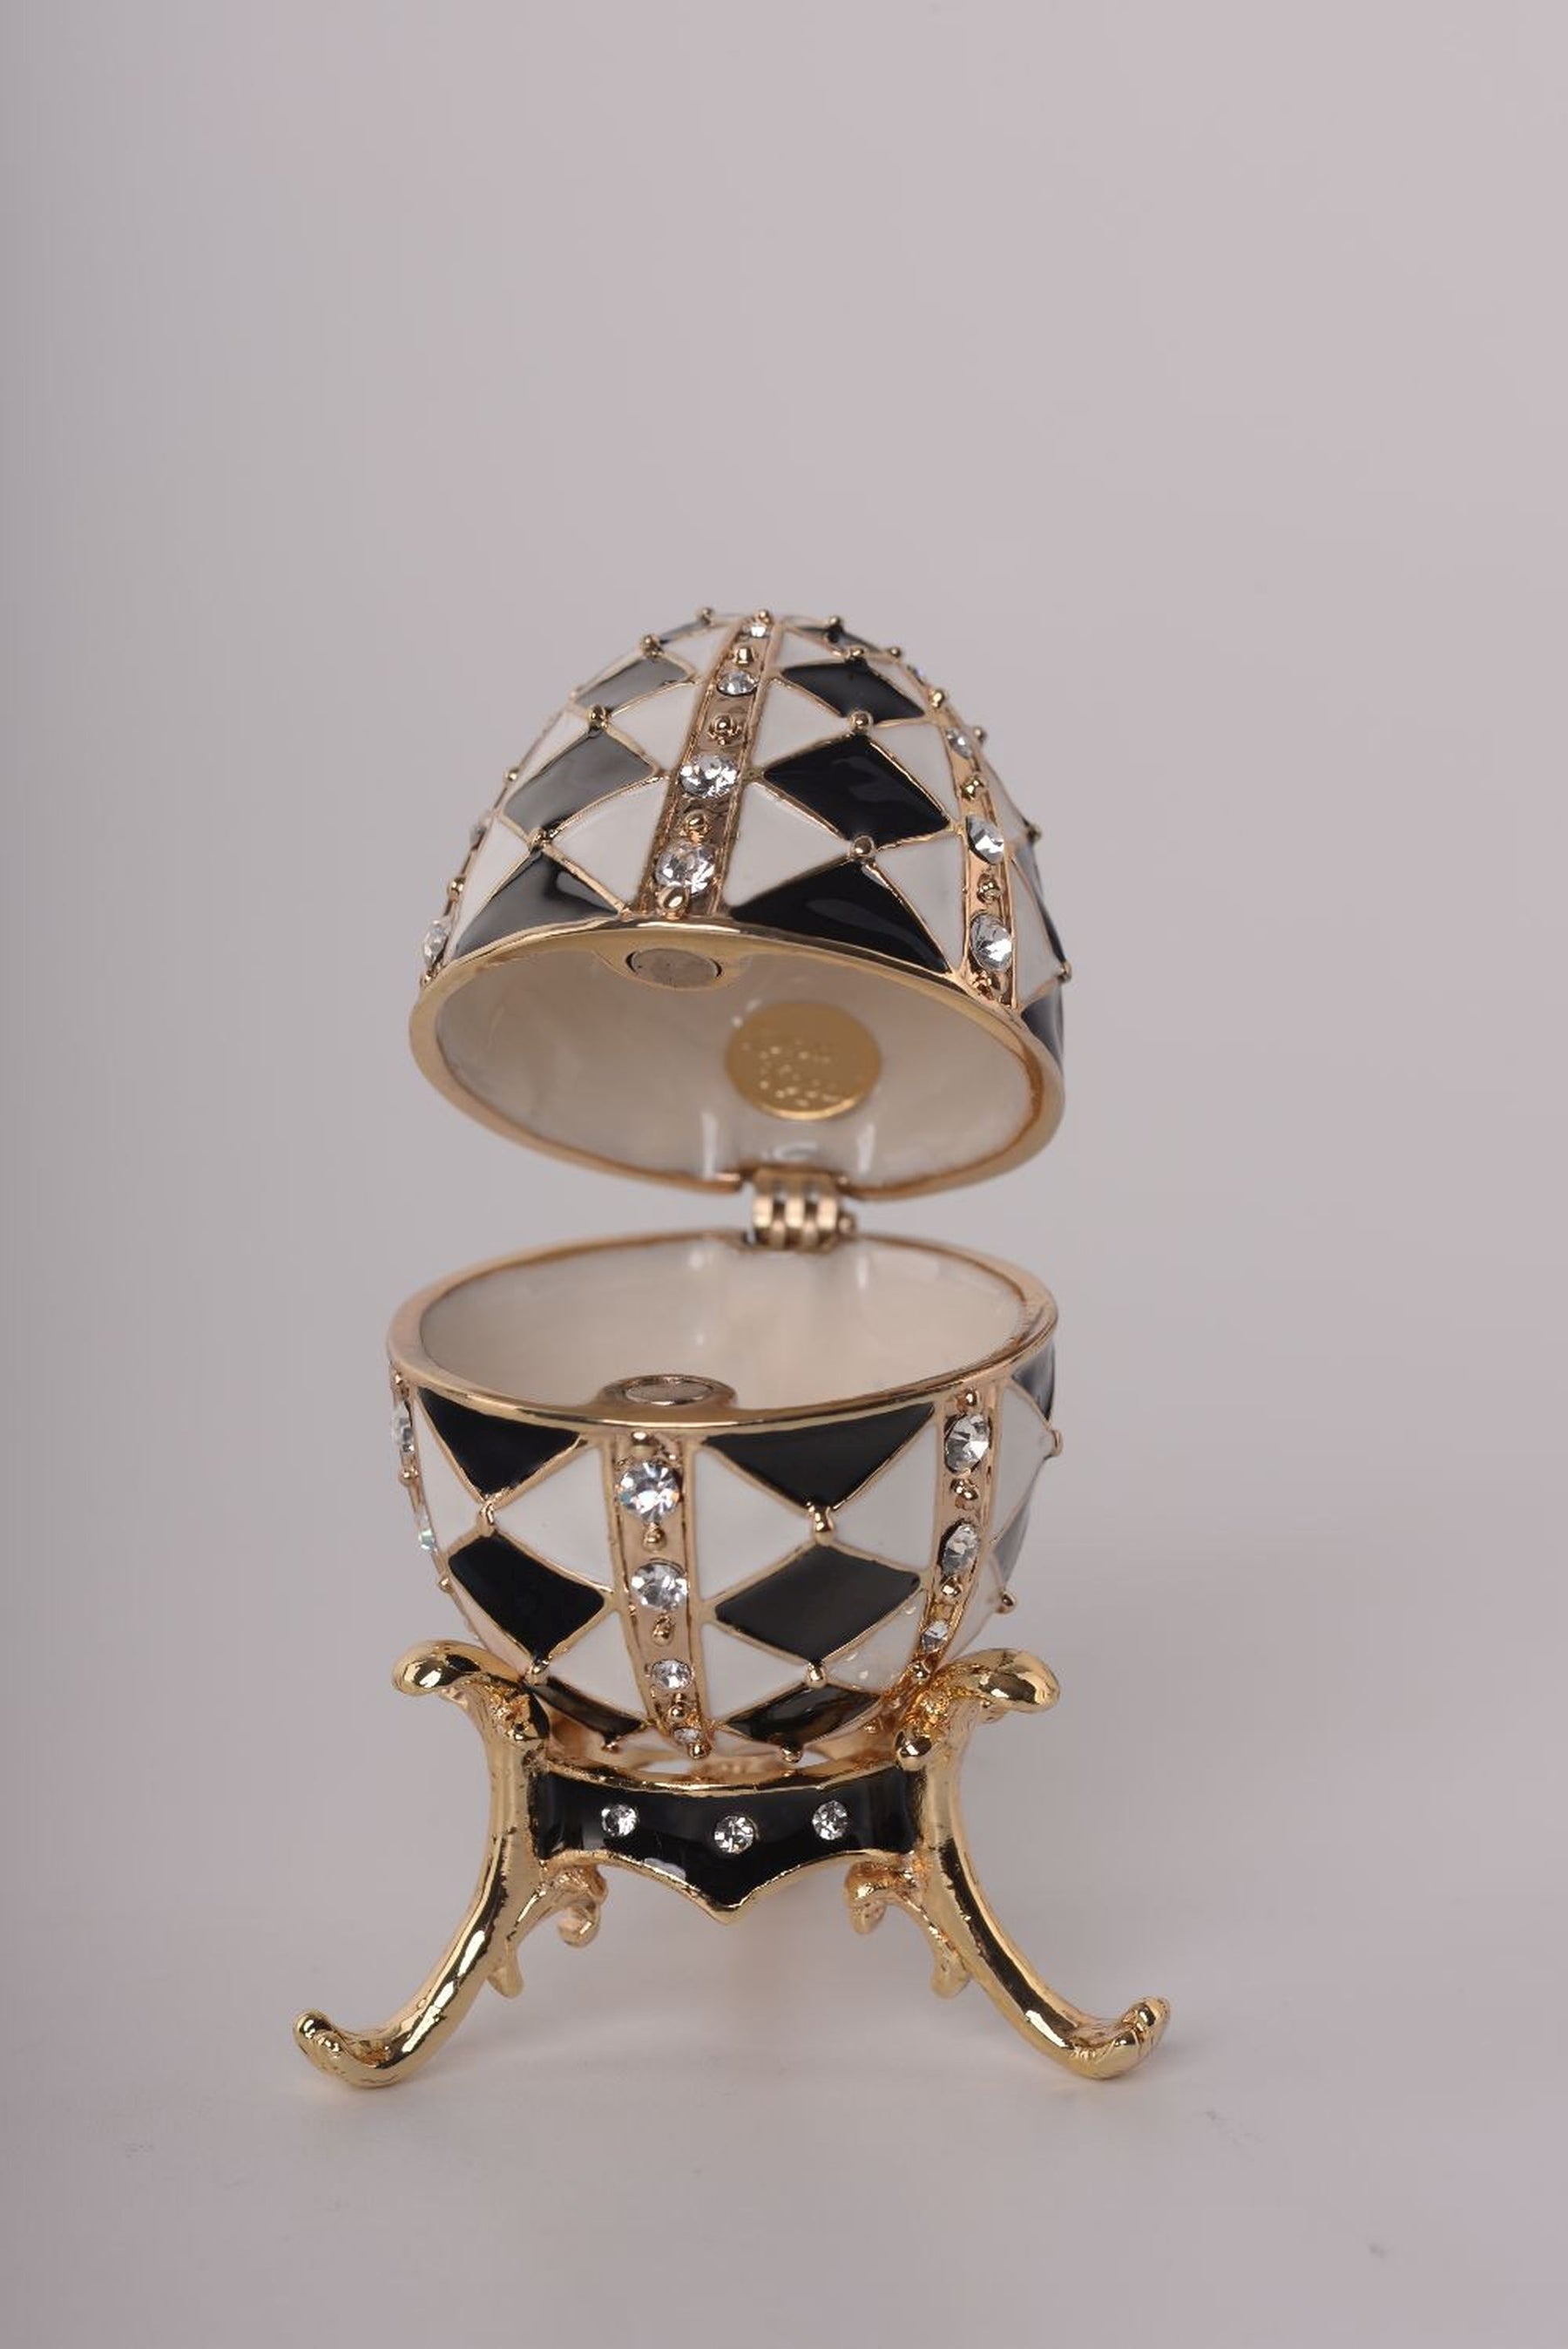 Black and White Faberge Egg with Gold Necklace Inside